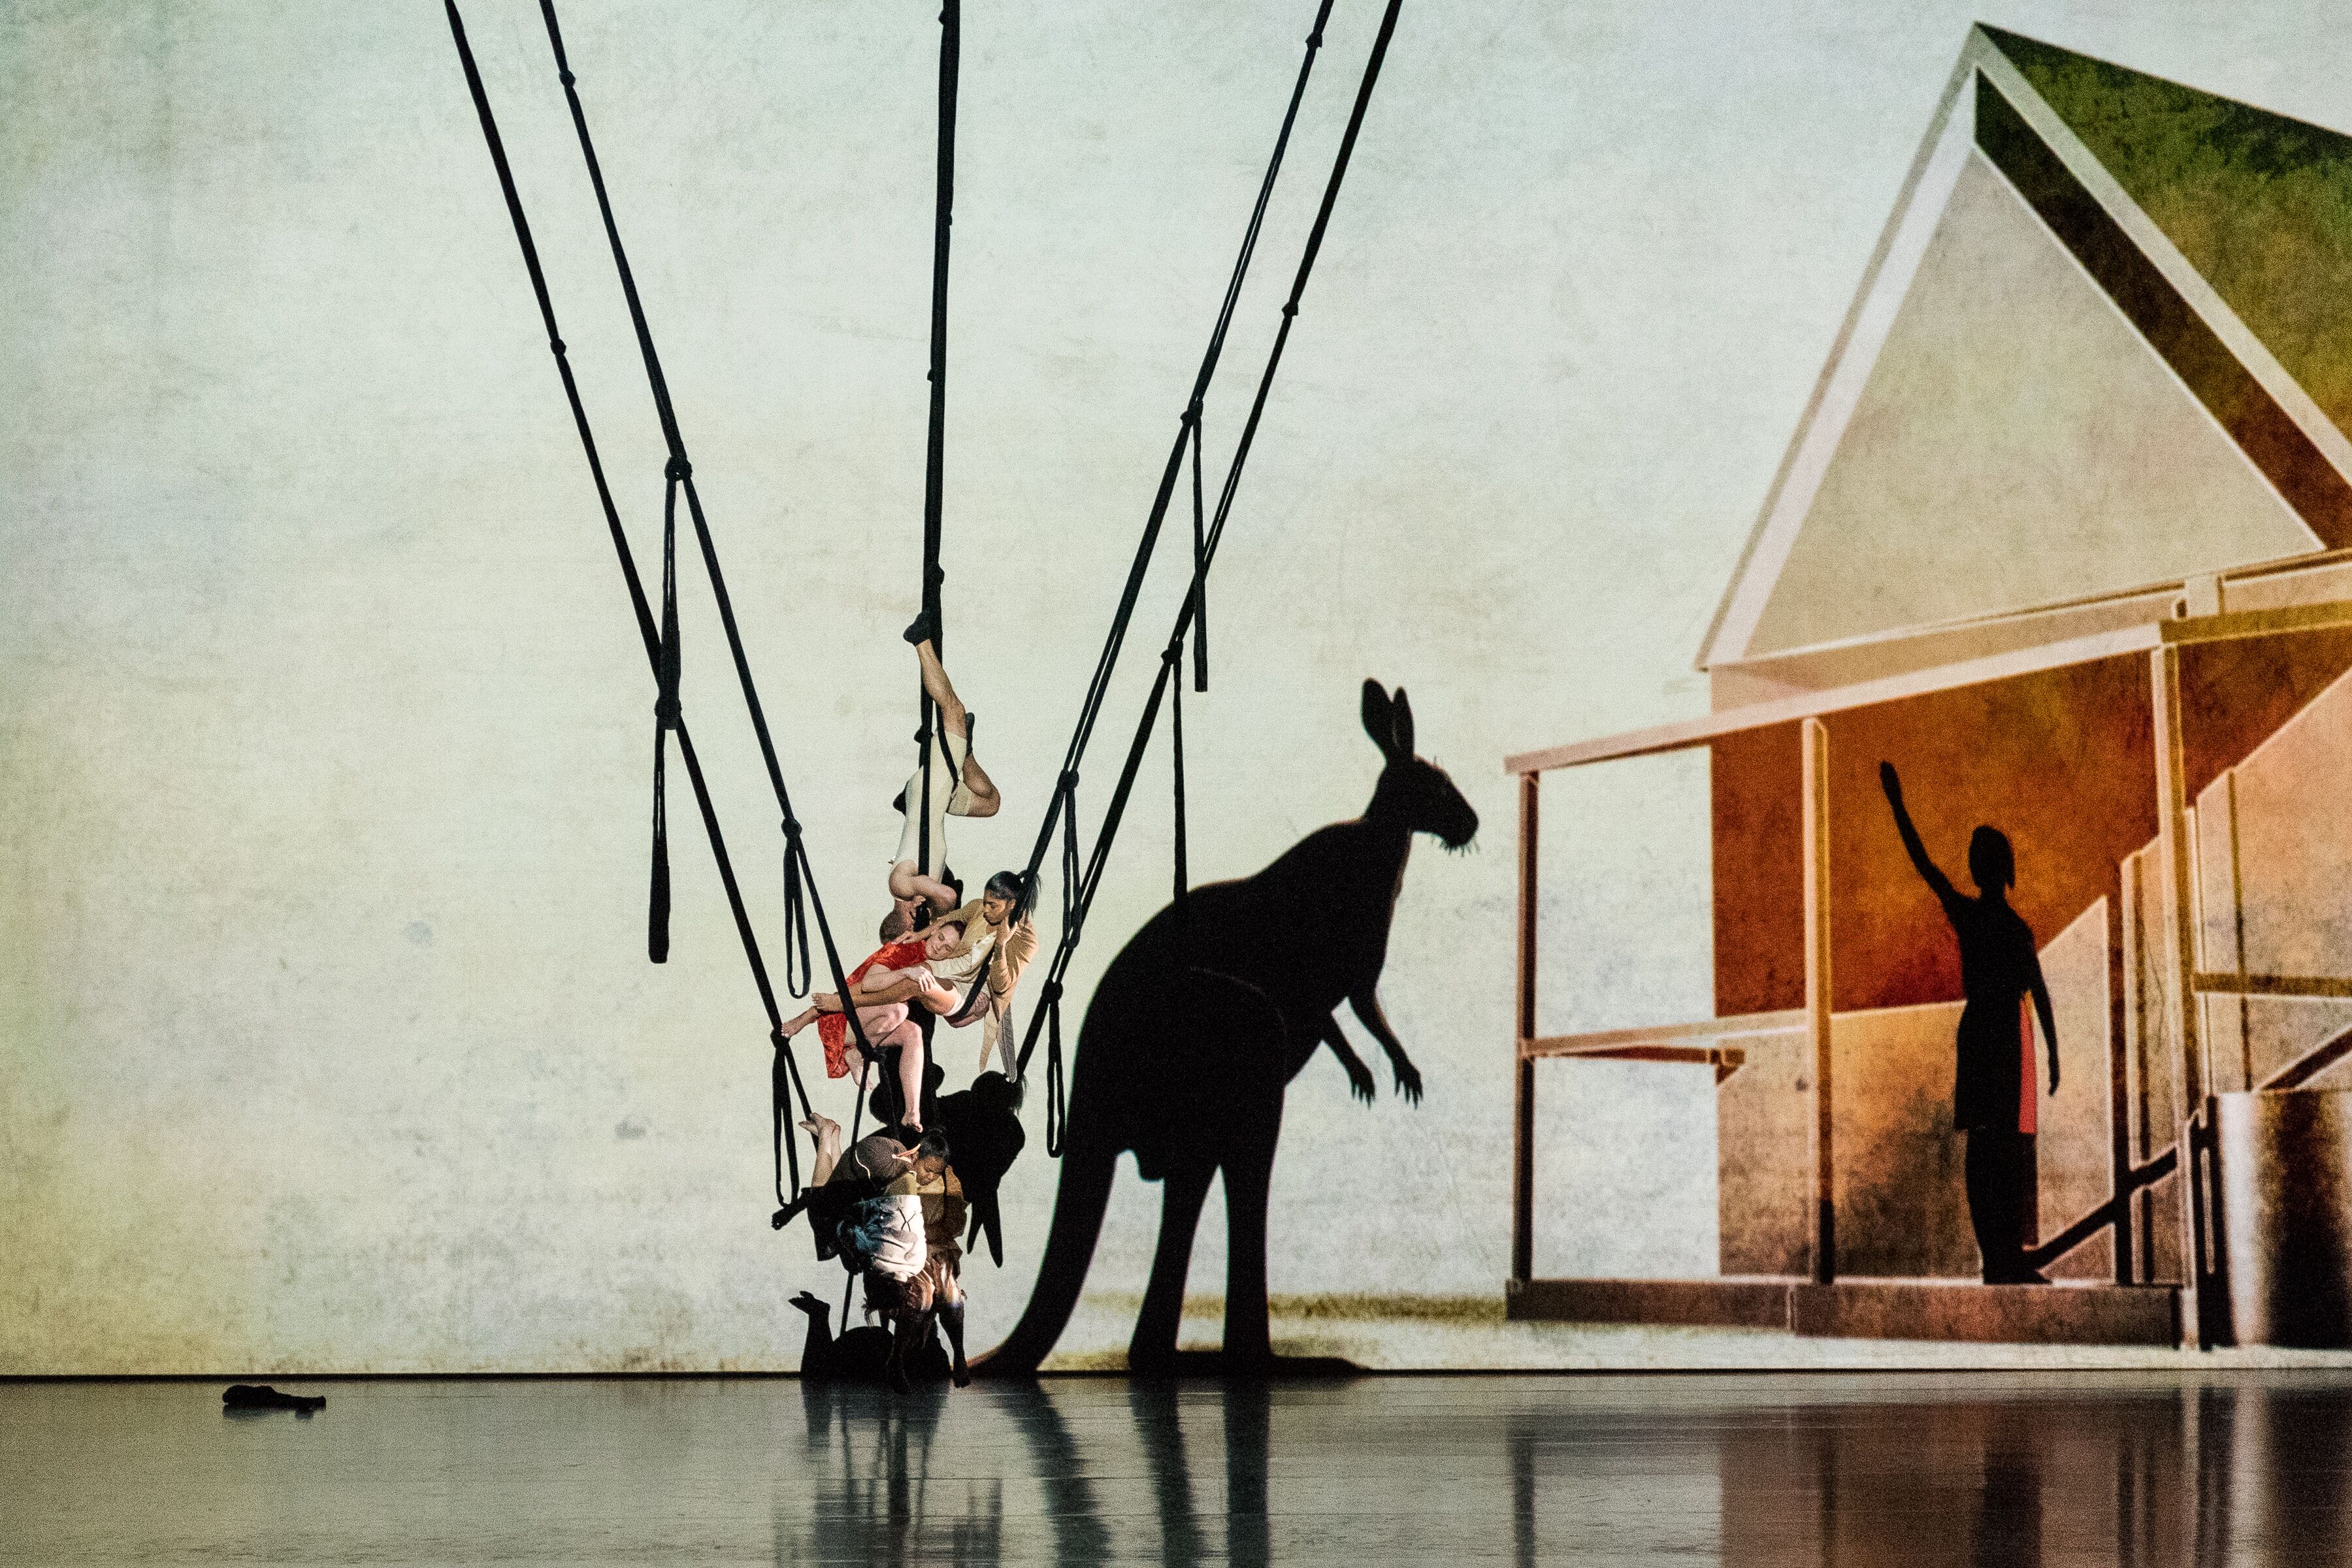 Dot and the Kangaroo : A Theatrical Adaptation at the Sydney Opera House